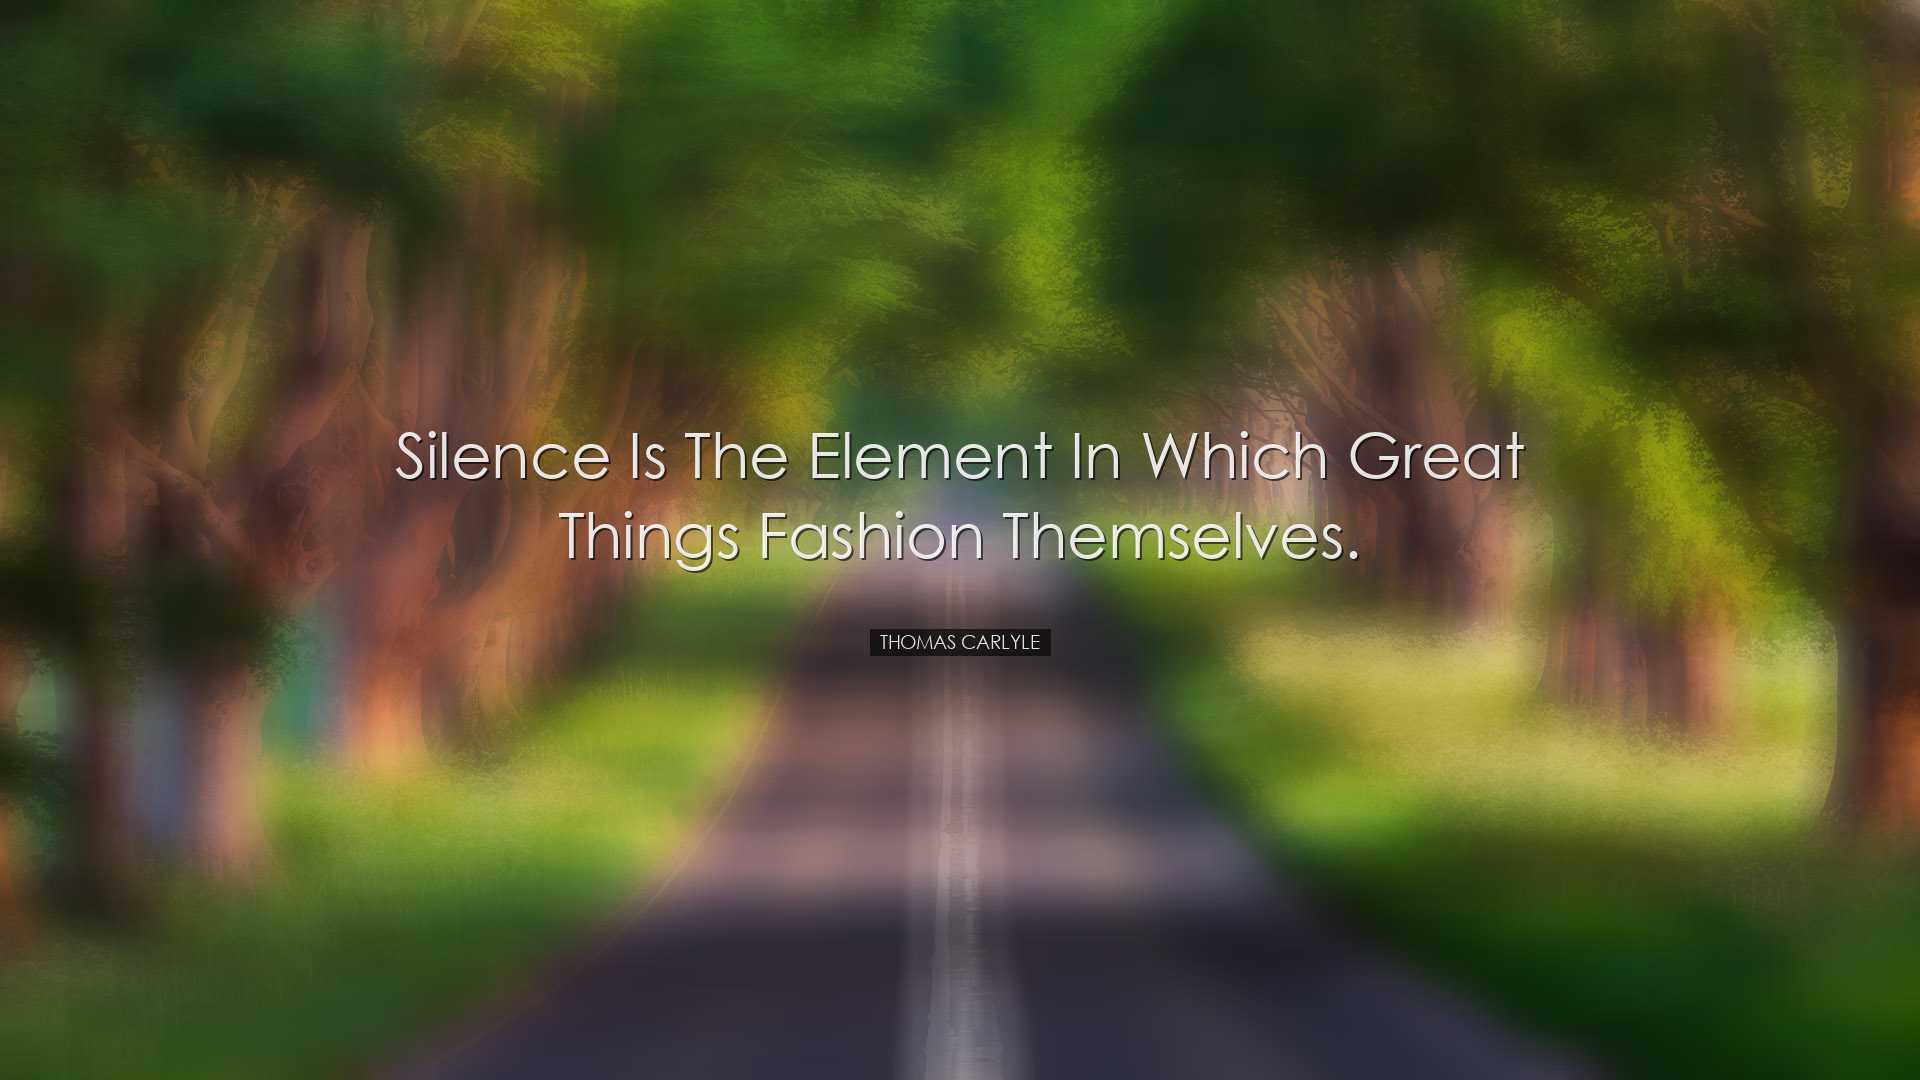 Silence is the element in which great things fashion themselves. -